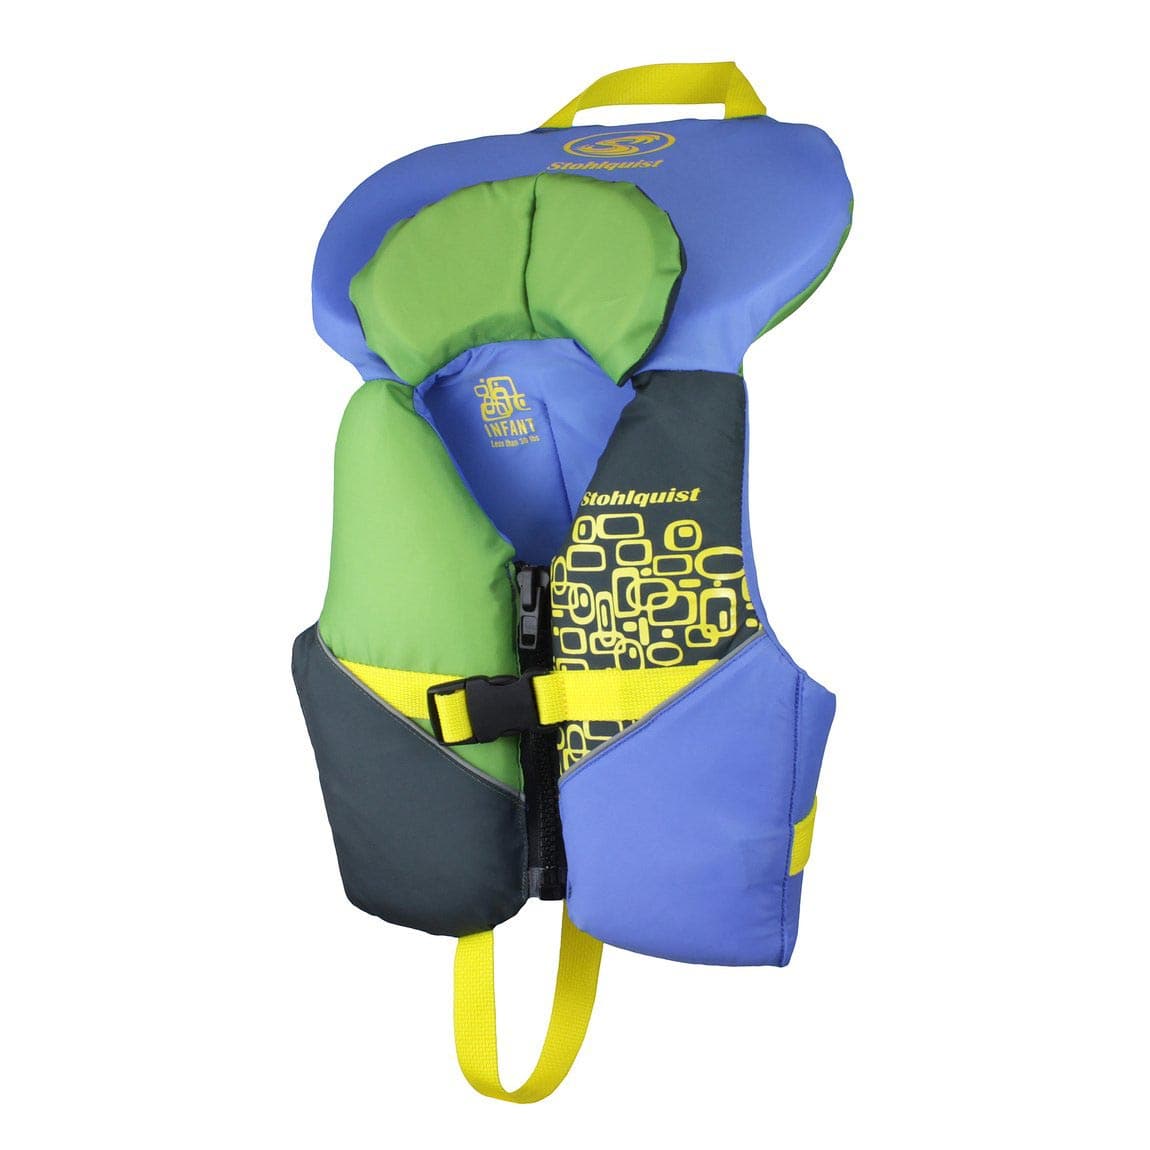 Featuring the Infant & Child PFDs kid's pfd manufactured by Stohlquist shown here from a seventh angle.